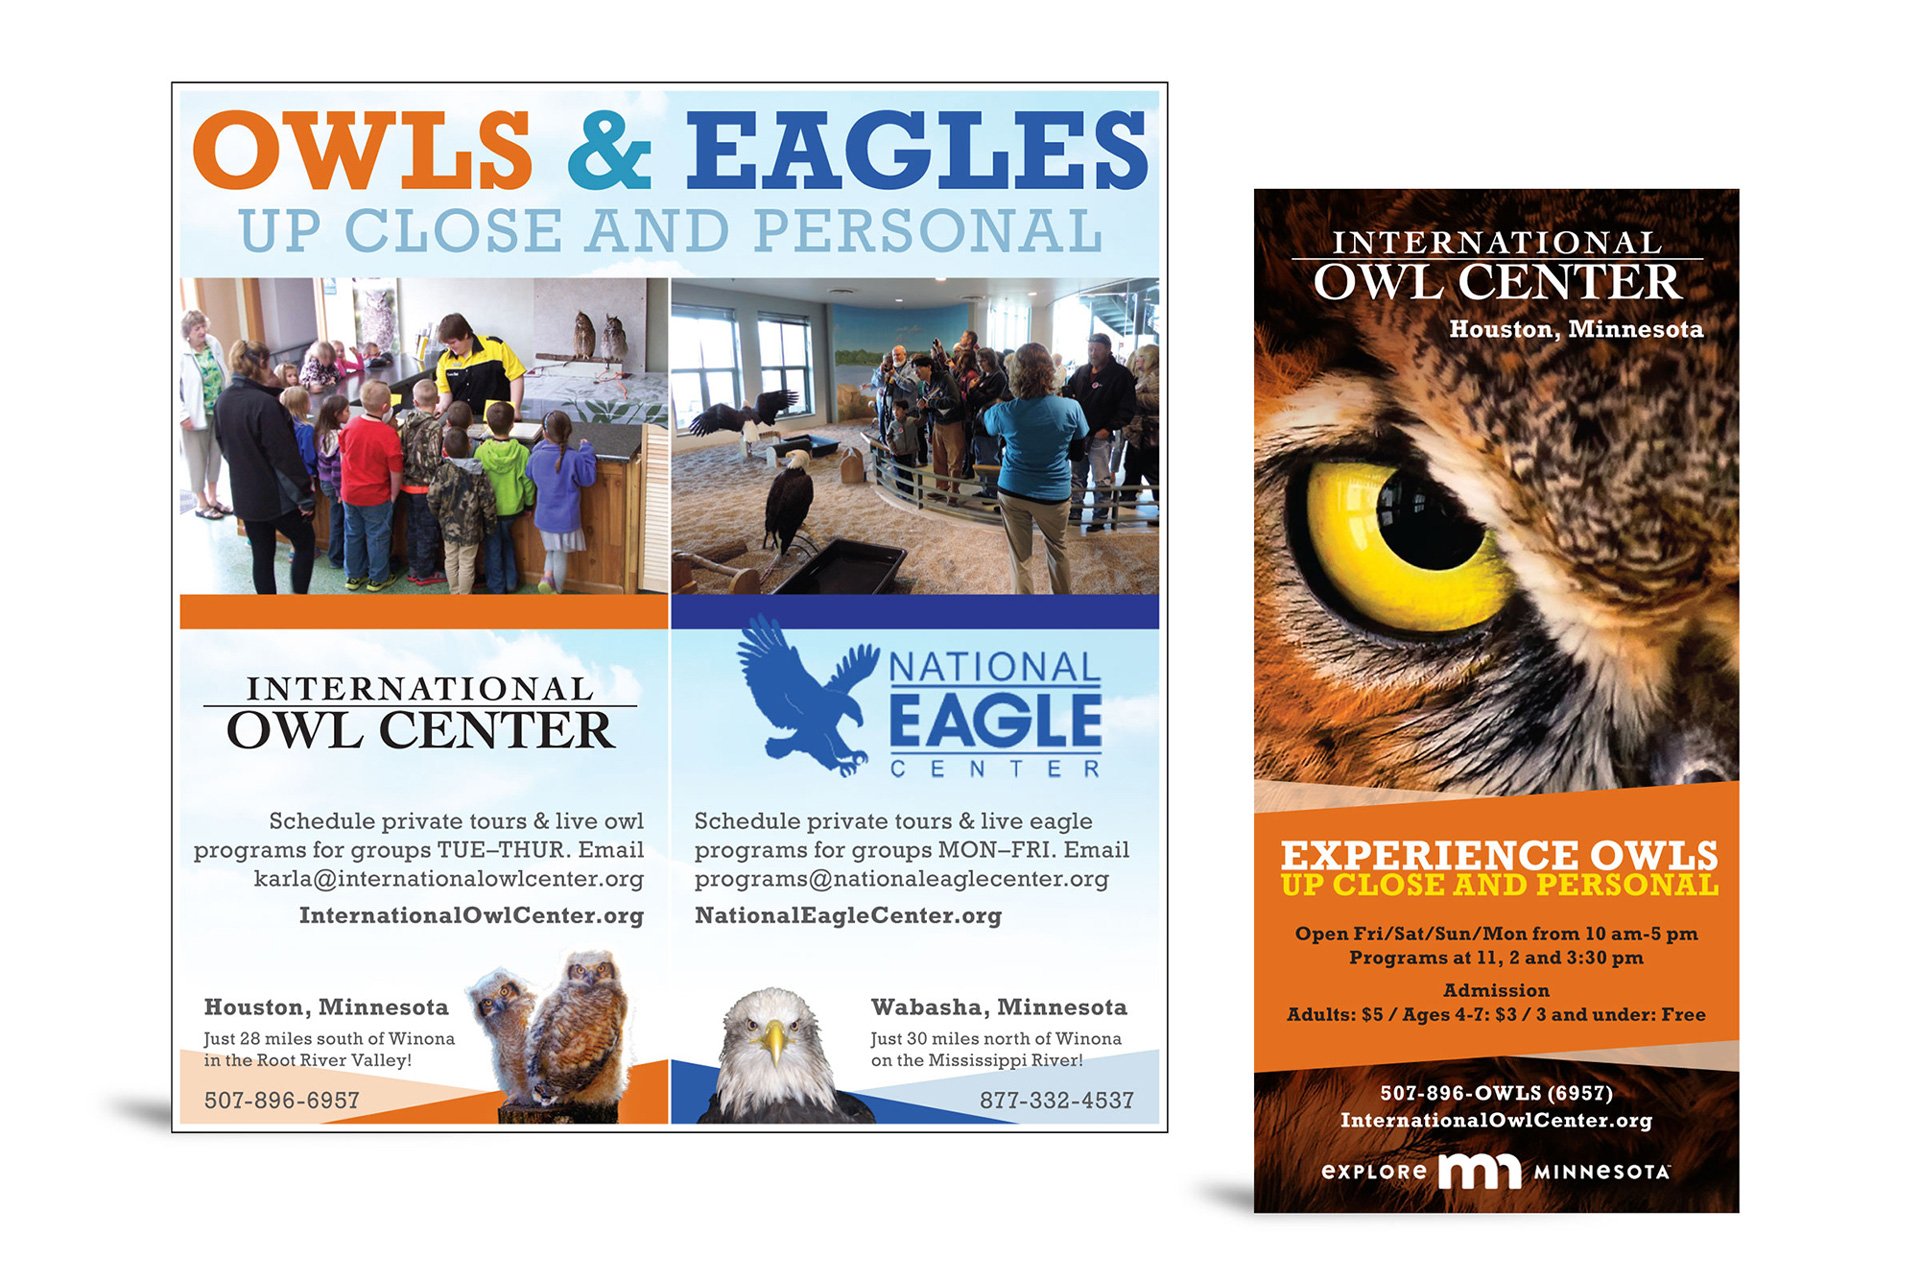 Full-color brochure advertising the International Owl Center and the National Eagle Center